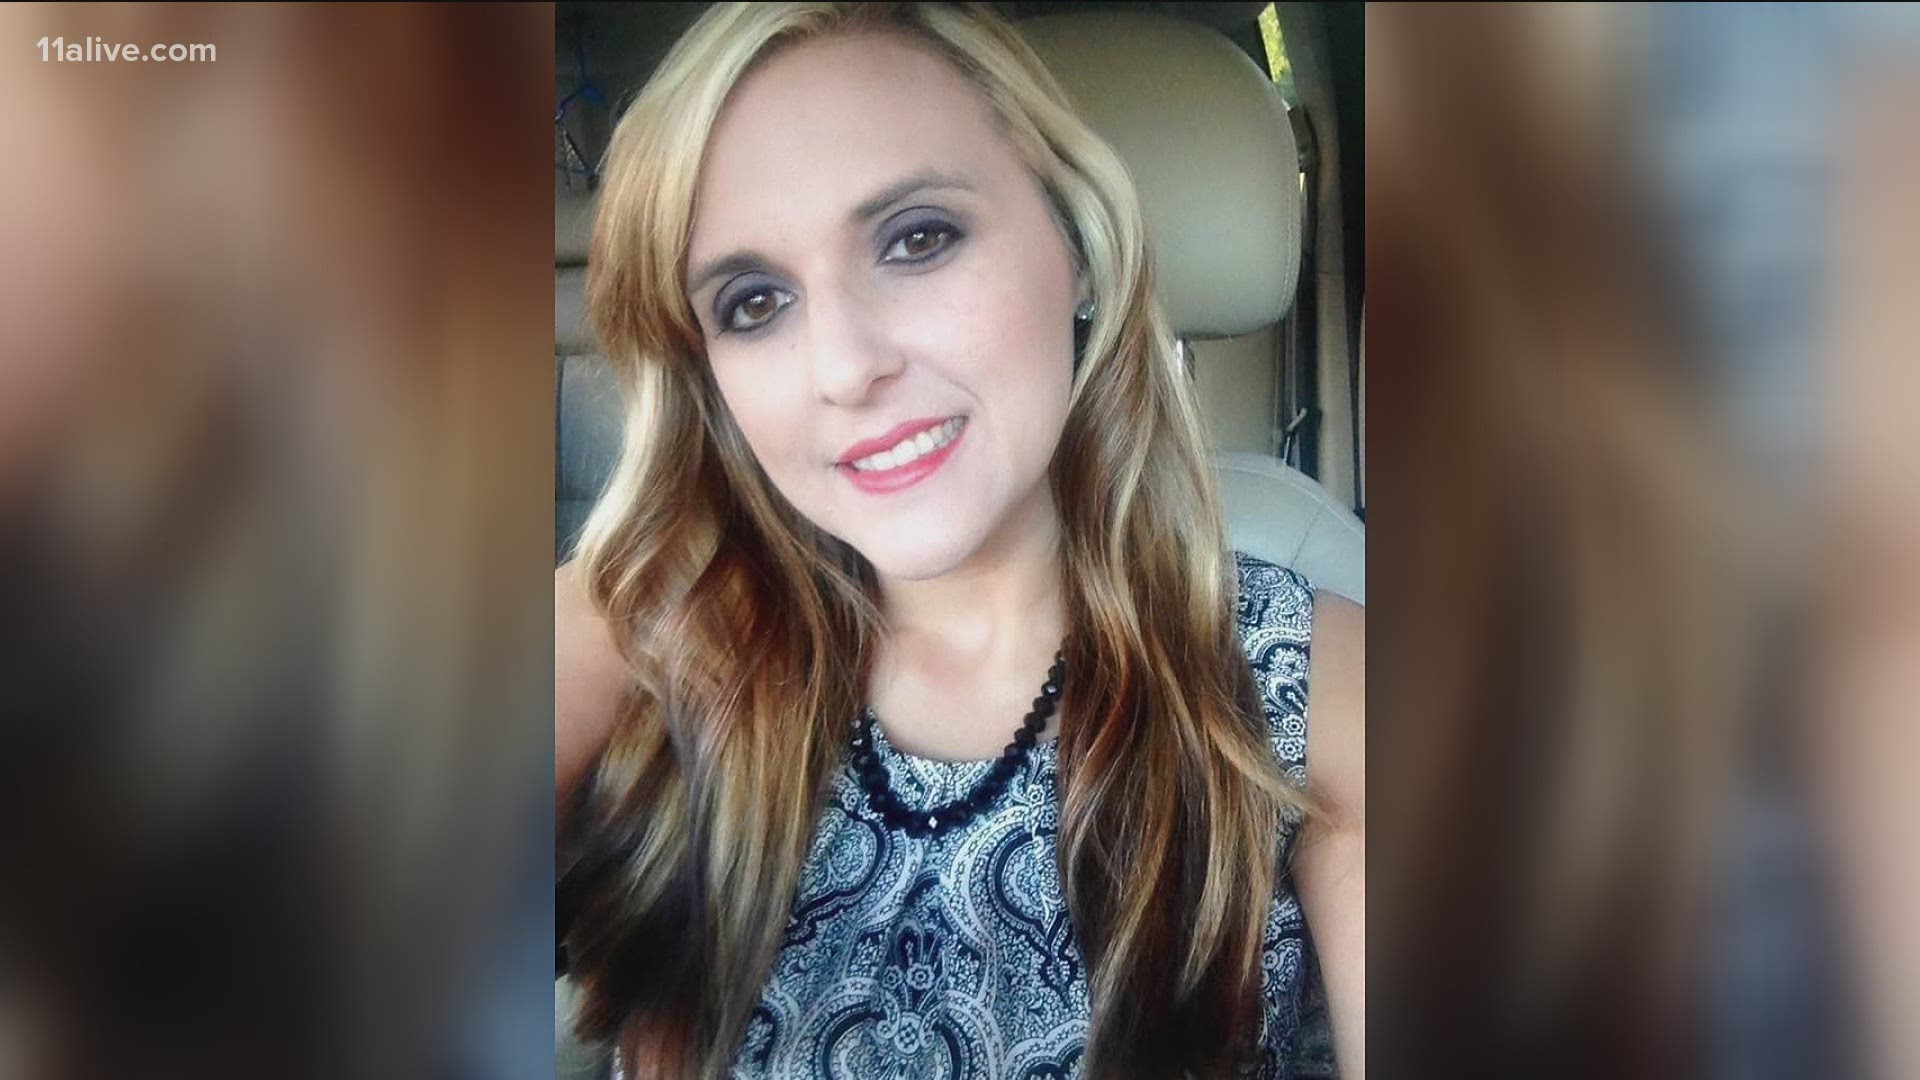 Crystal Stone's family wants to raise awareness about domestic violence after their mother was killed. They thought she had escaped the abuse.